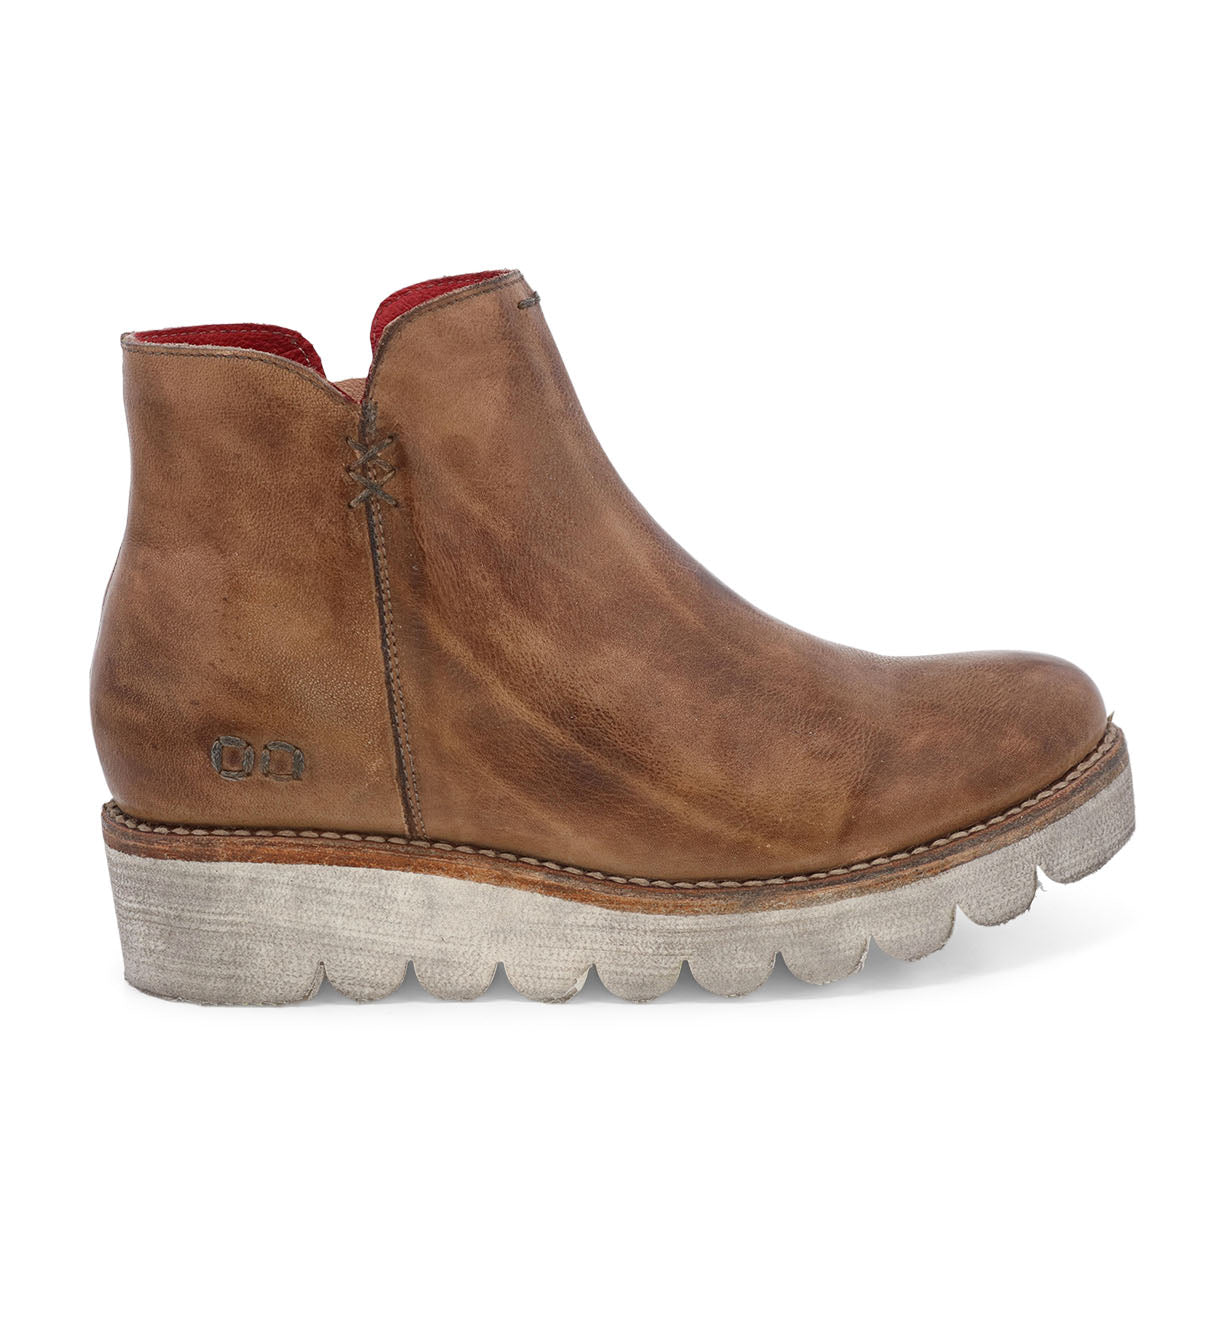 A women's brown ankle boot - The Lydyi boot by Bed Stu.